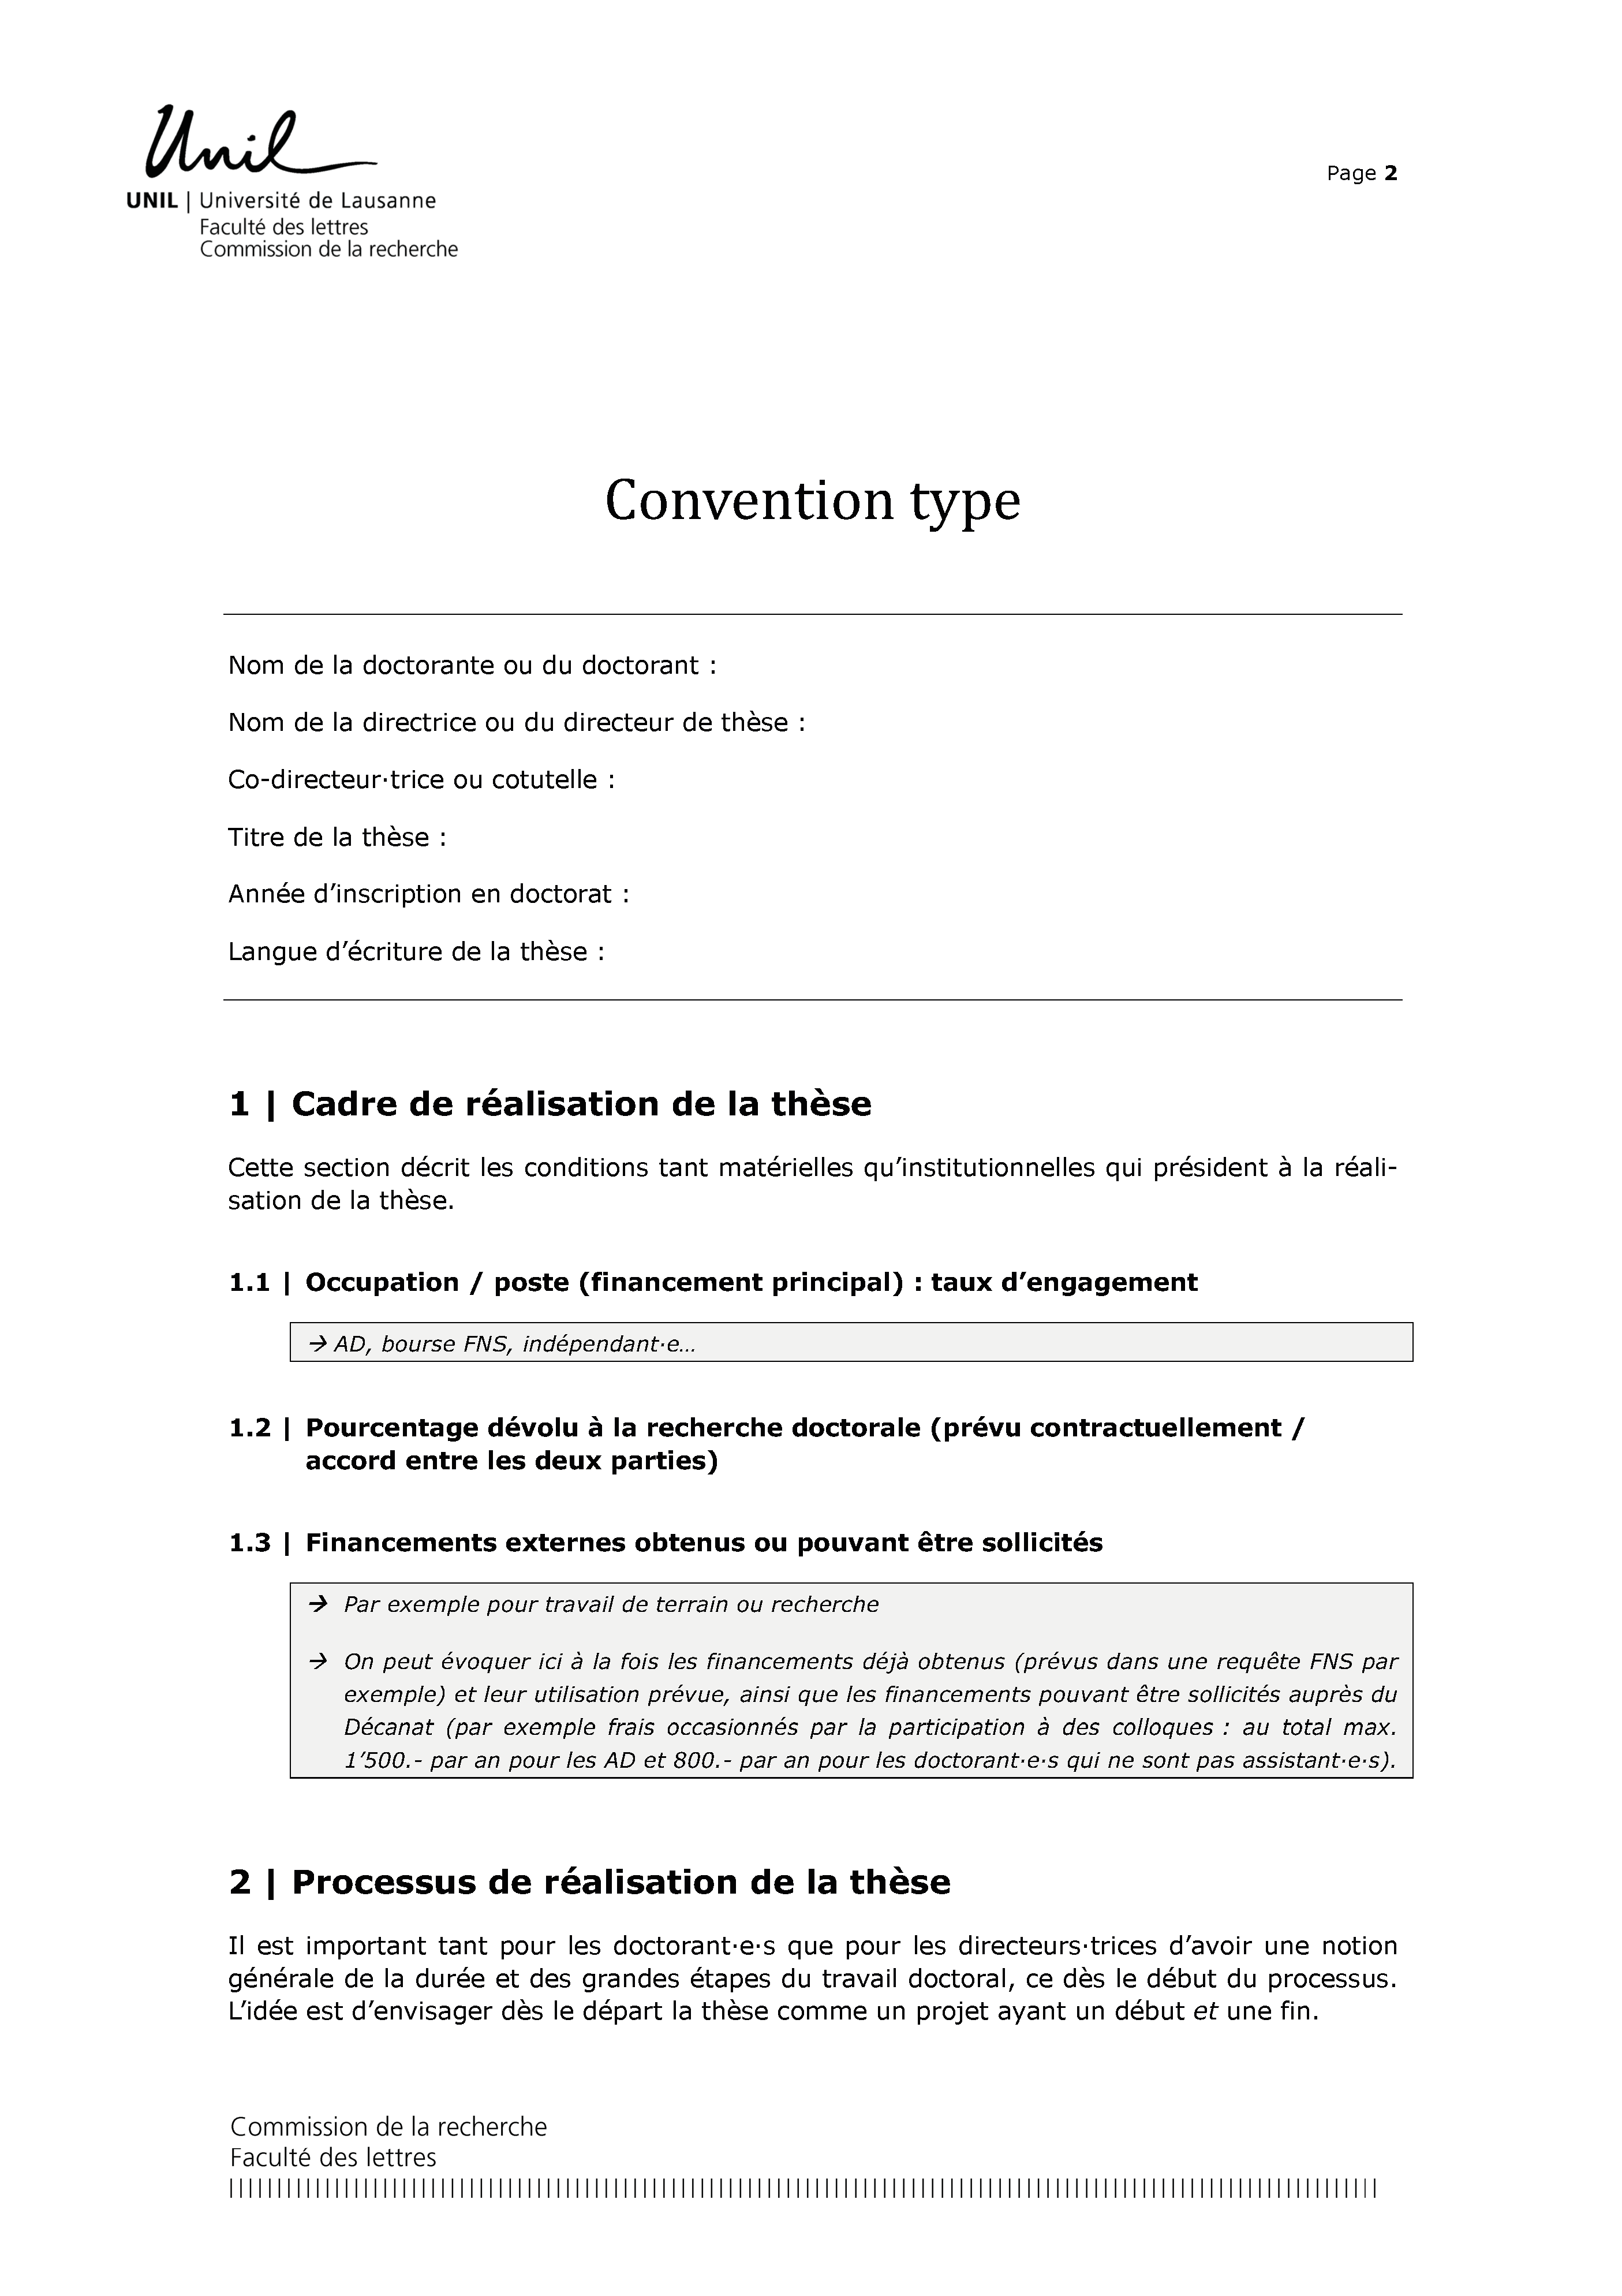 Pages de convention-these-type.png